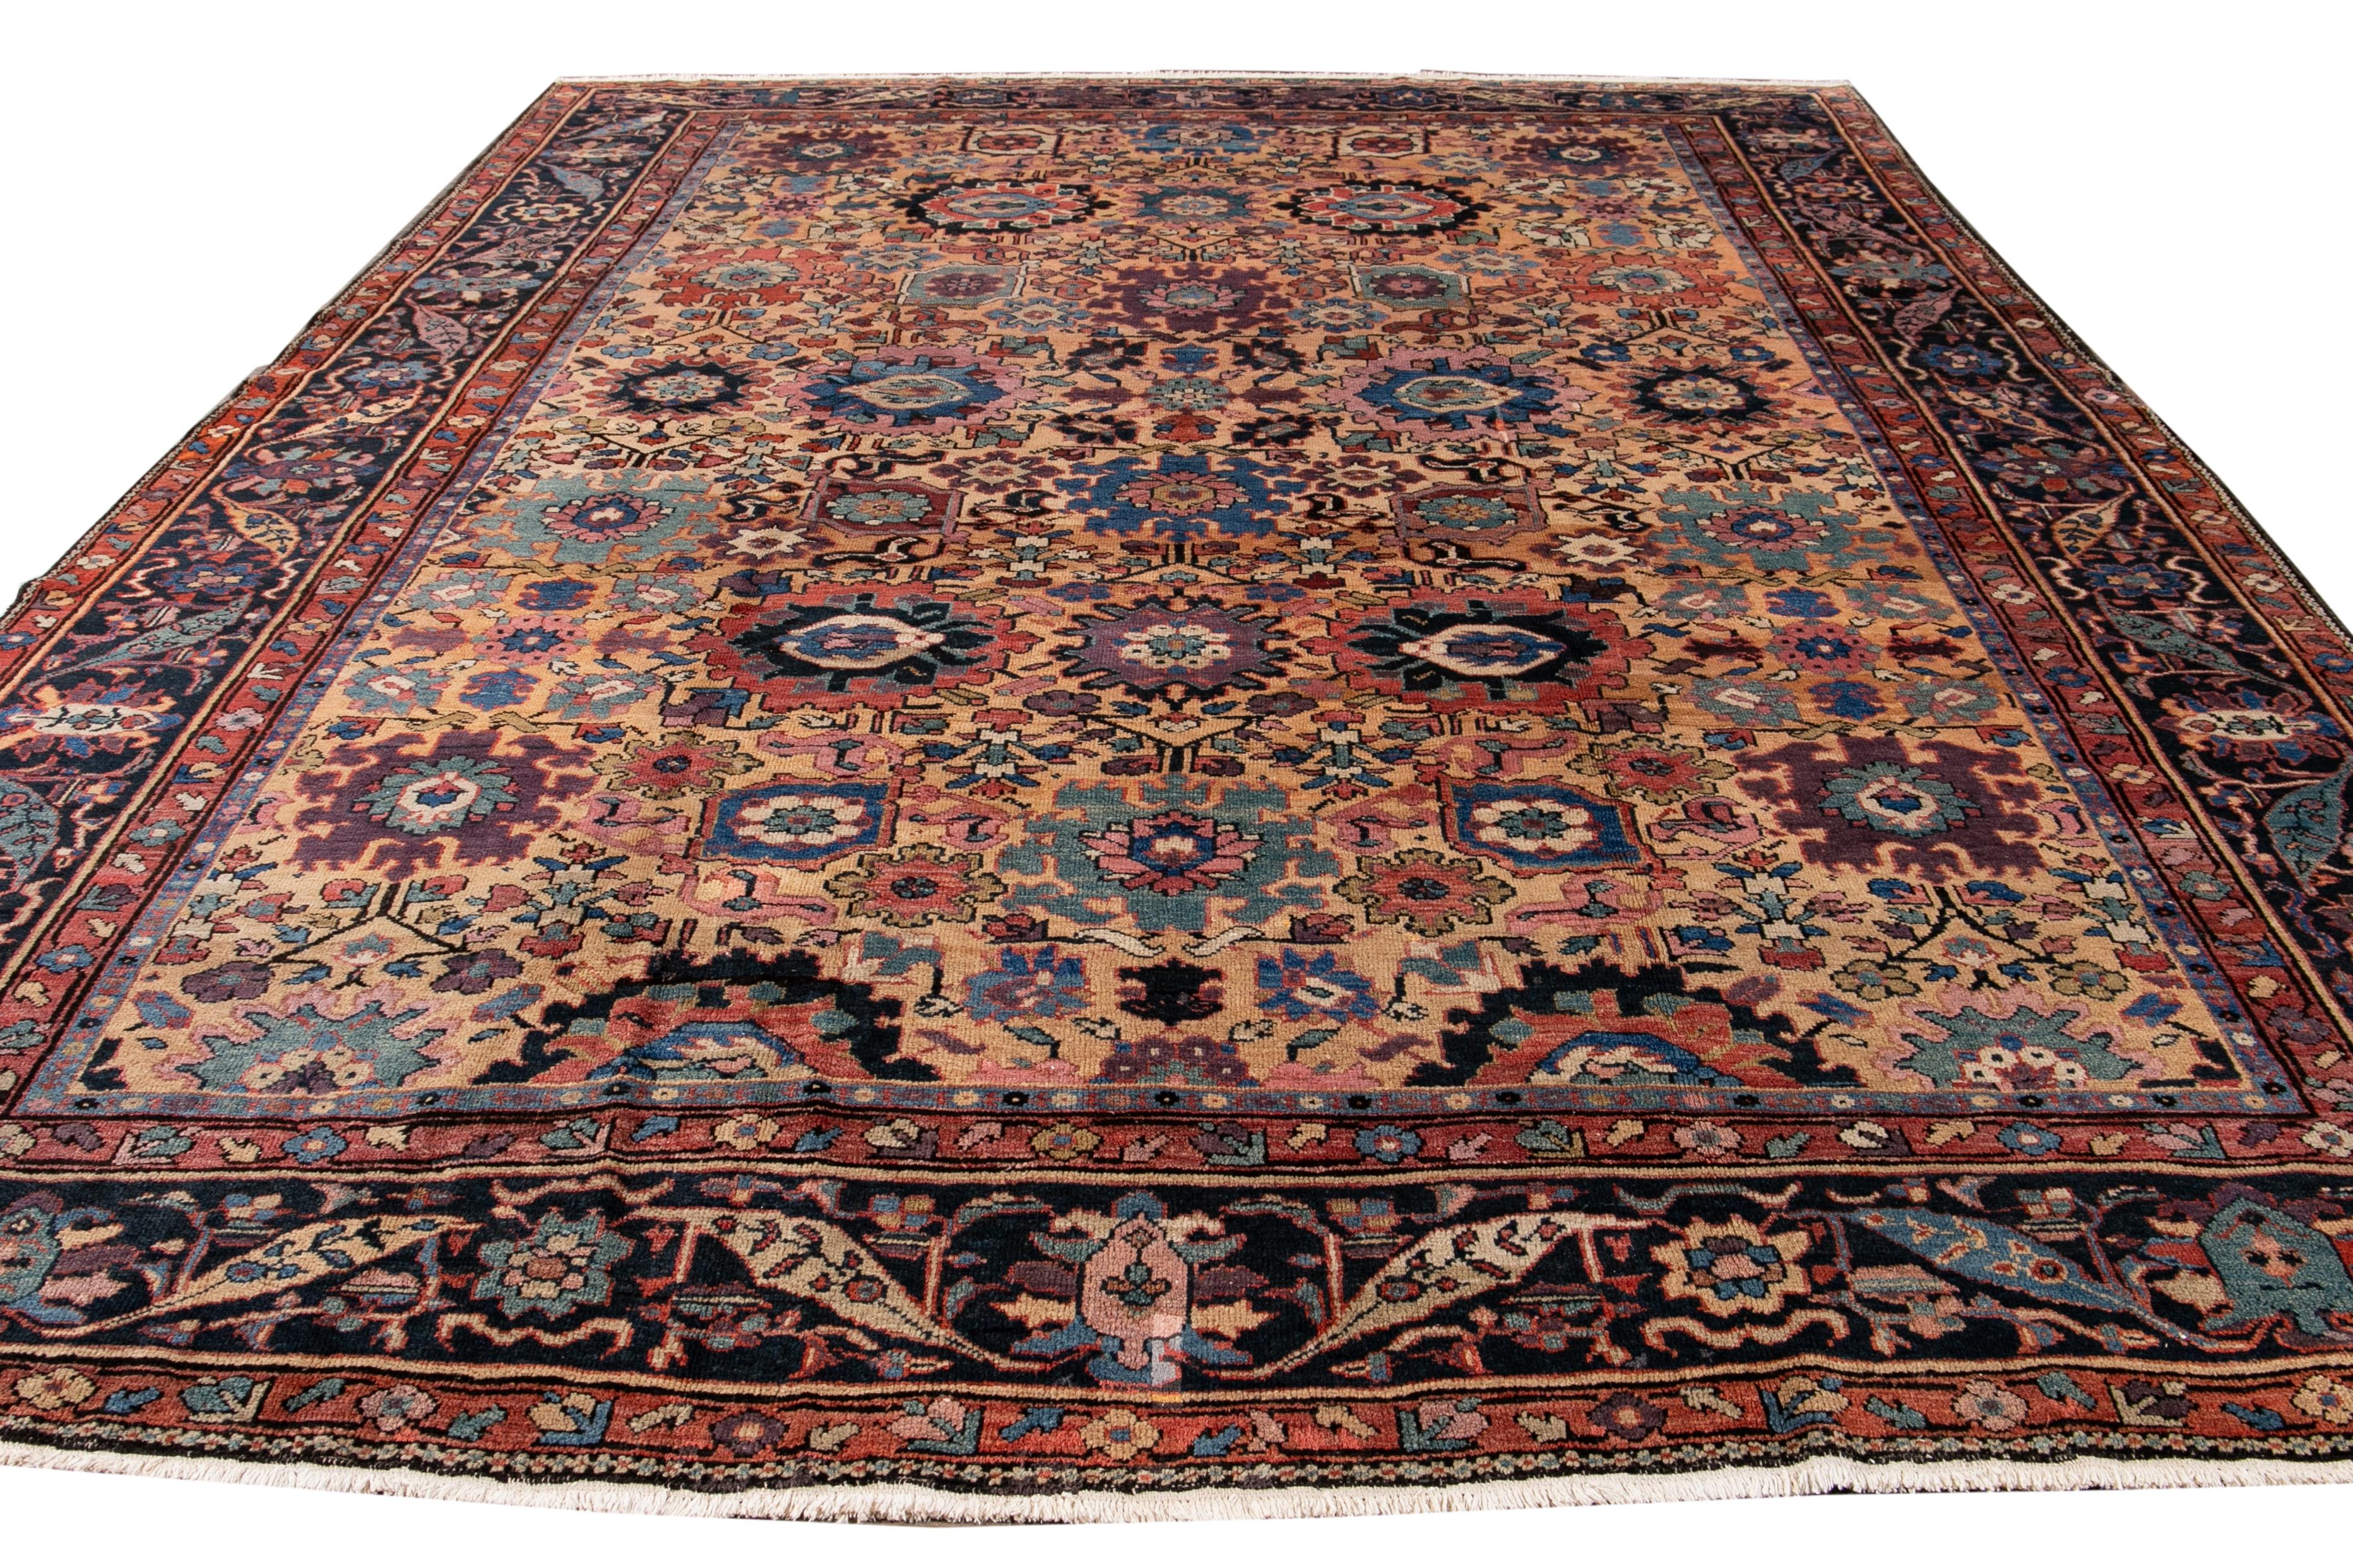 Islamic Antique Mahal Handmade Tan Wool Rug With Multicolor Floral Design For Sale